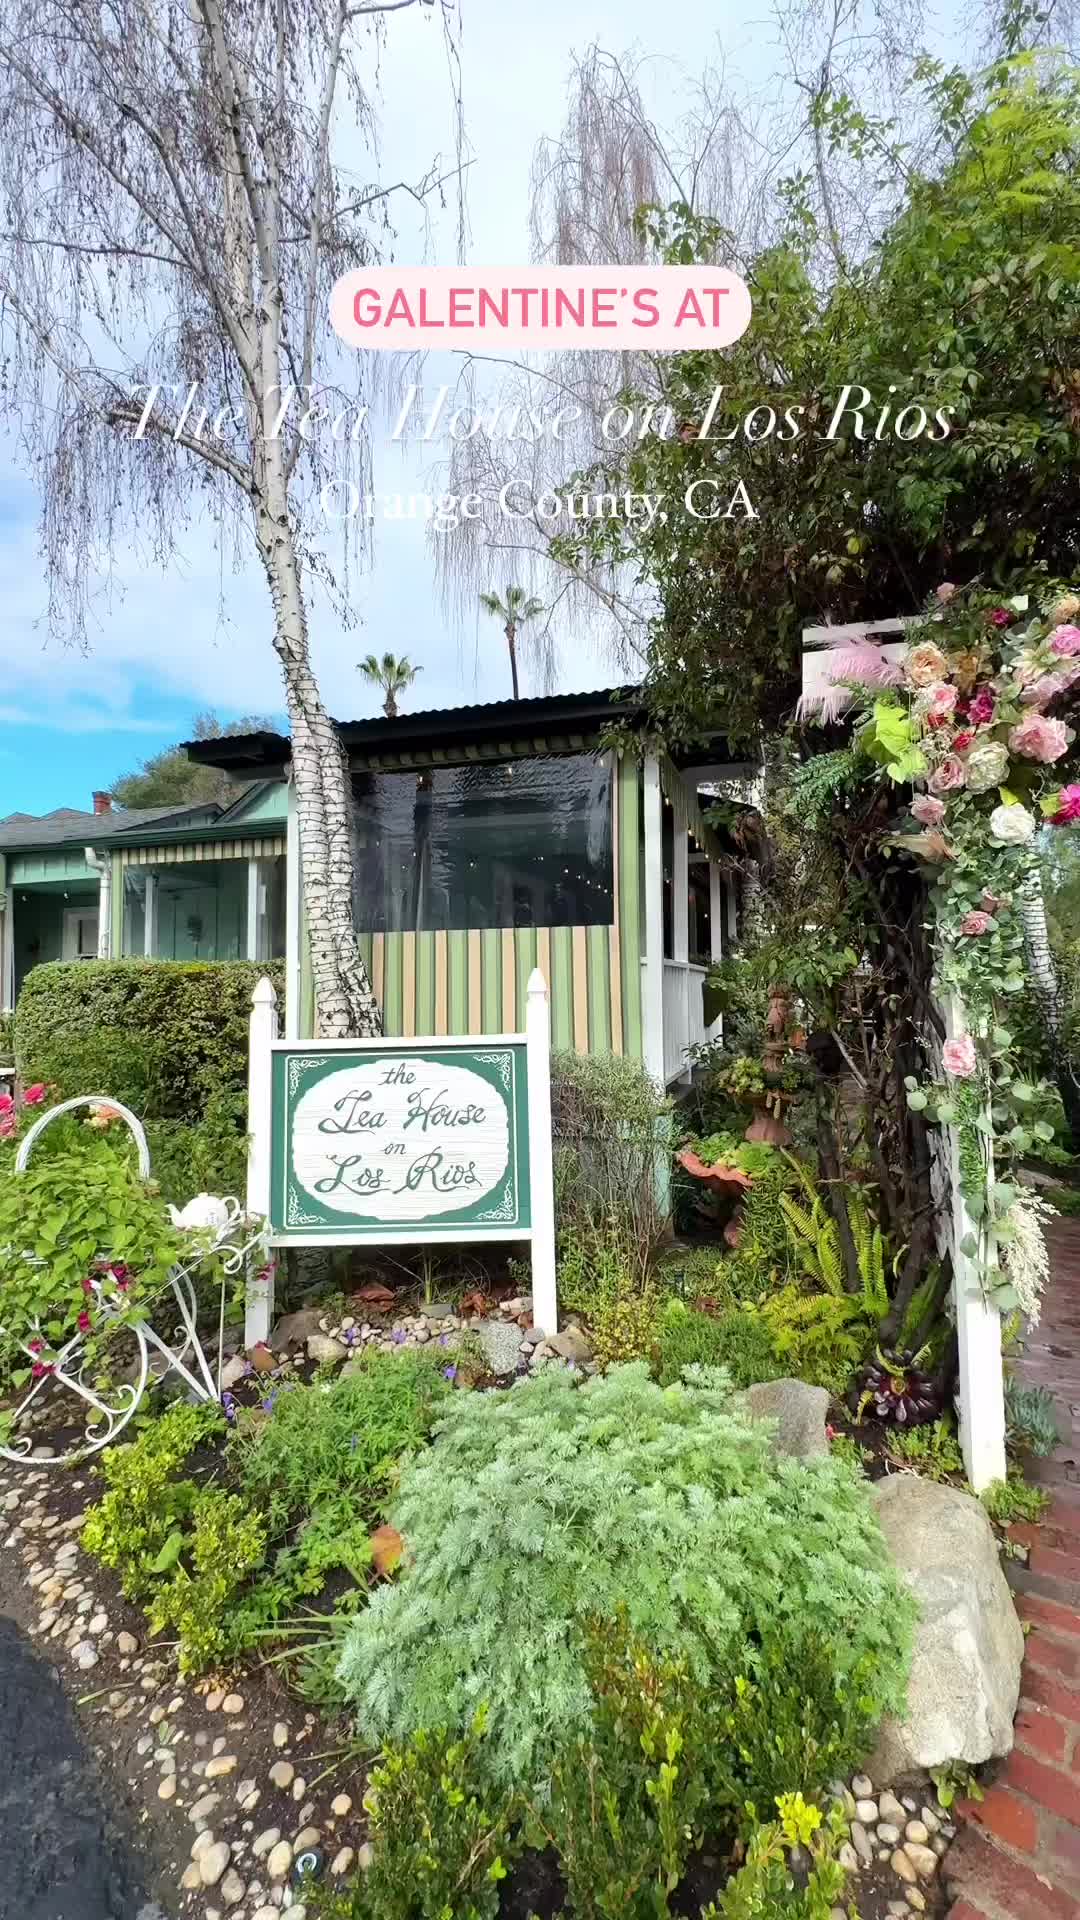 Celebrate Galentine’s Day at The Tea House on Los Rios